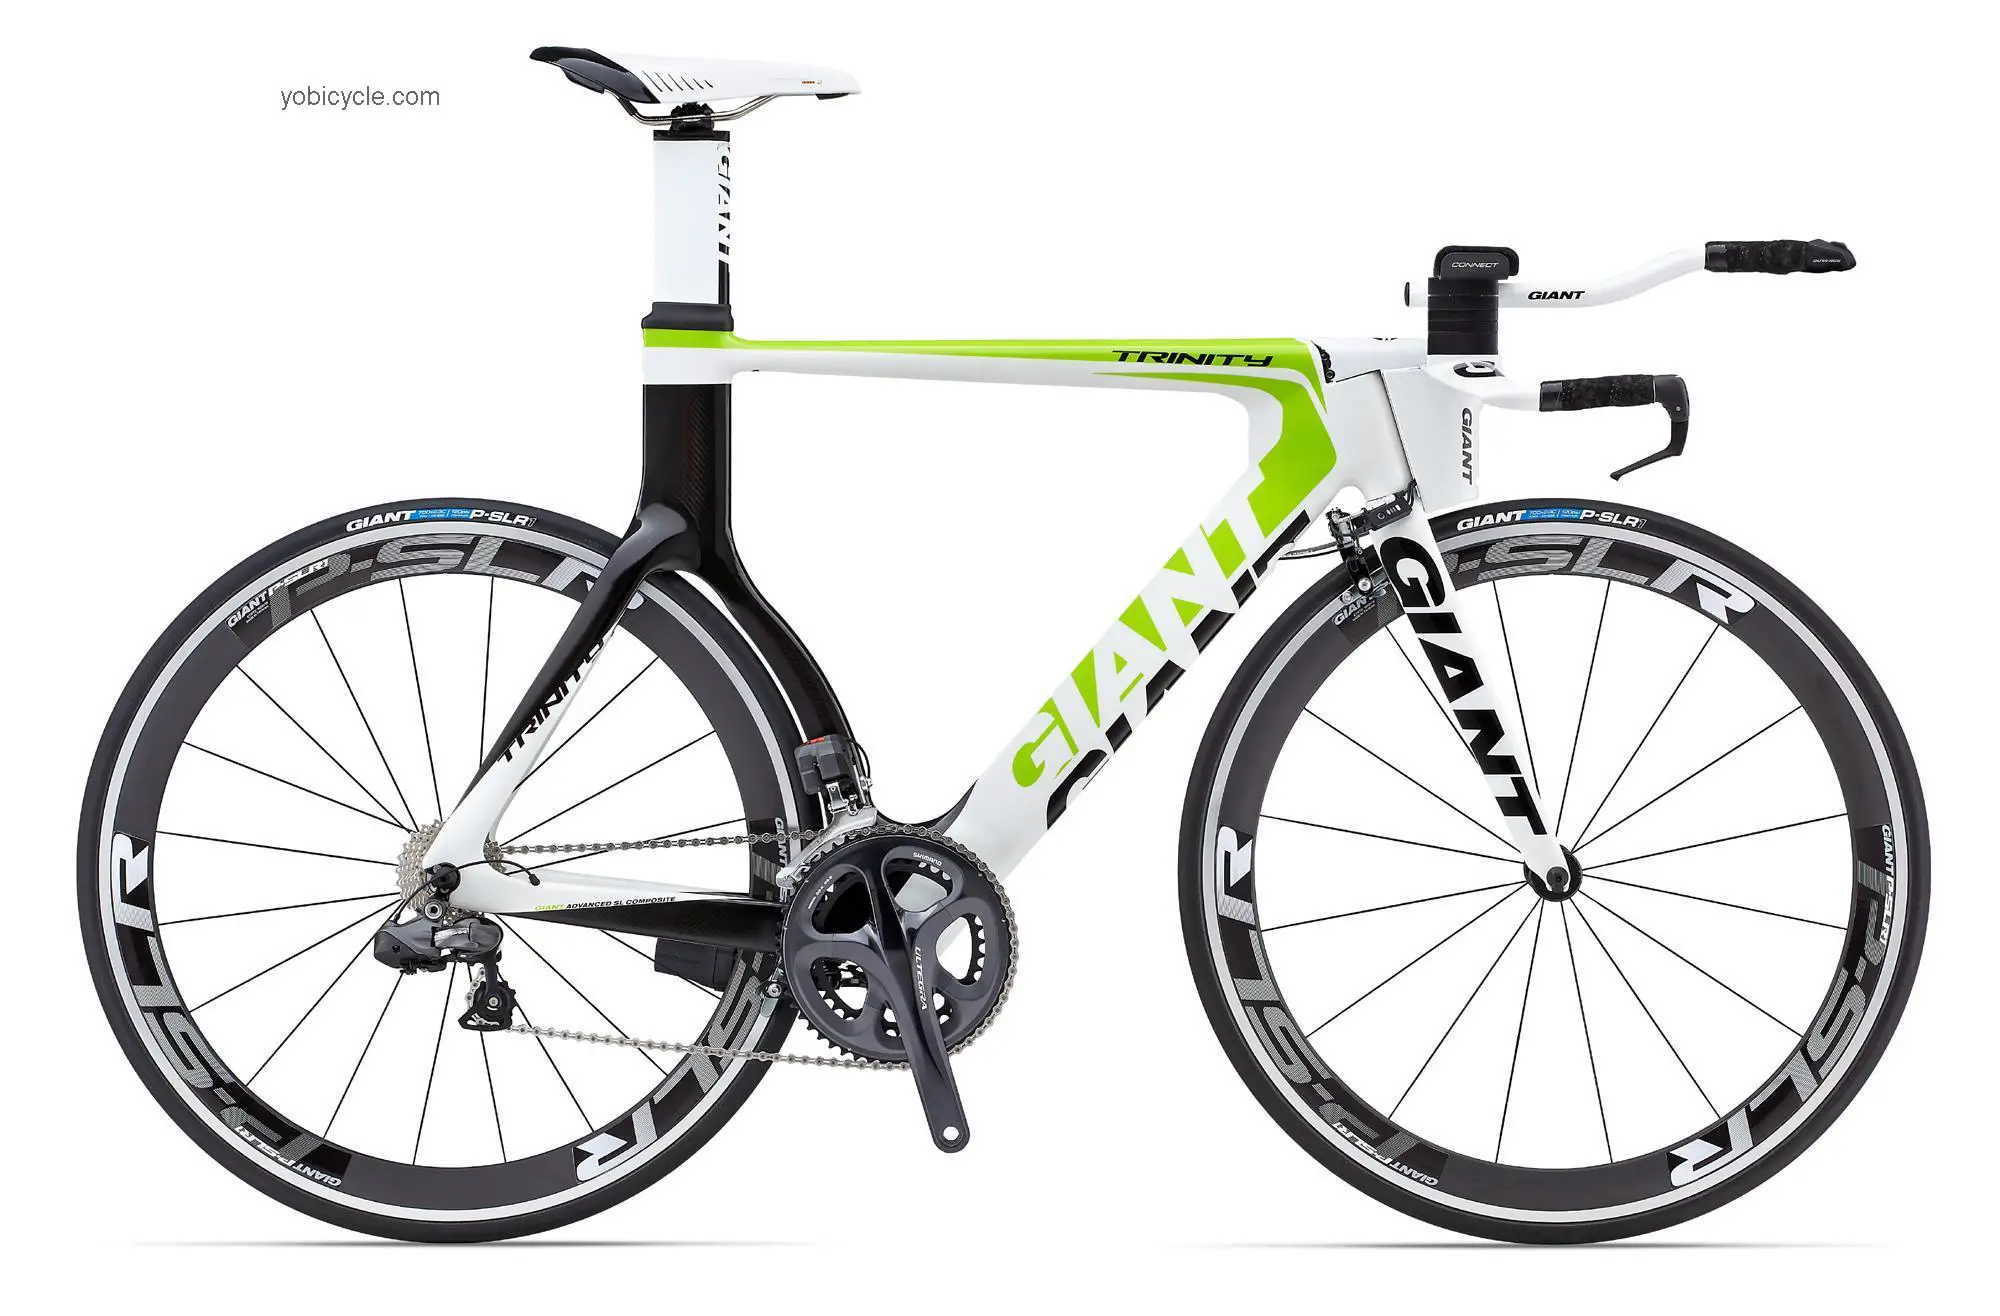 Giant Trinity Advanced SL 1 2013 comparison online with competitors